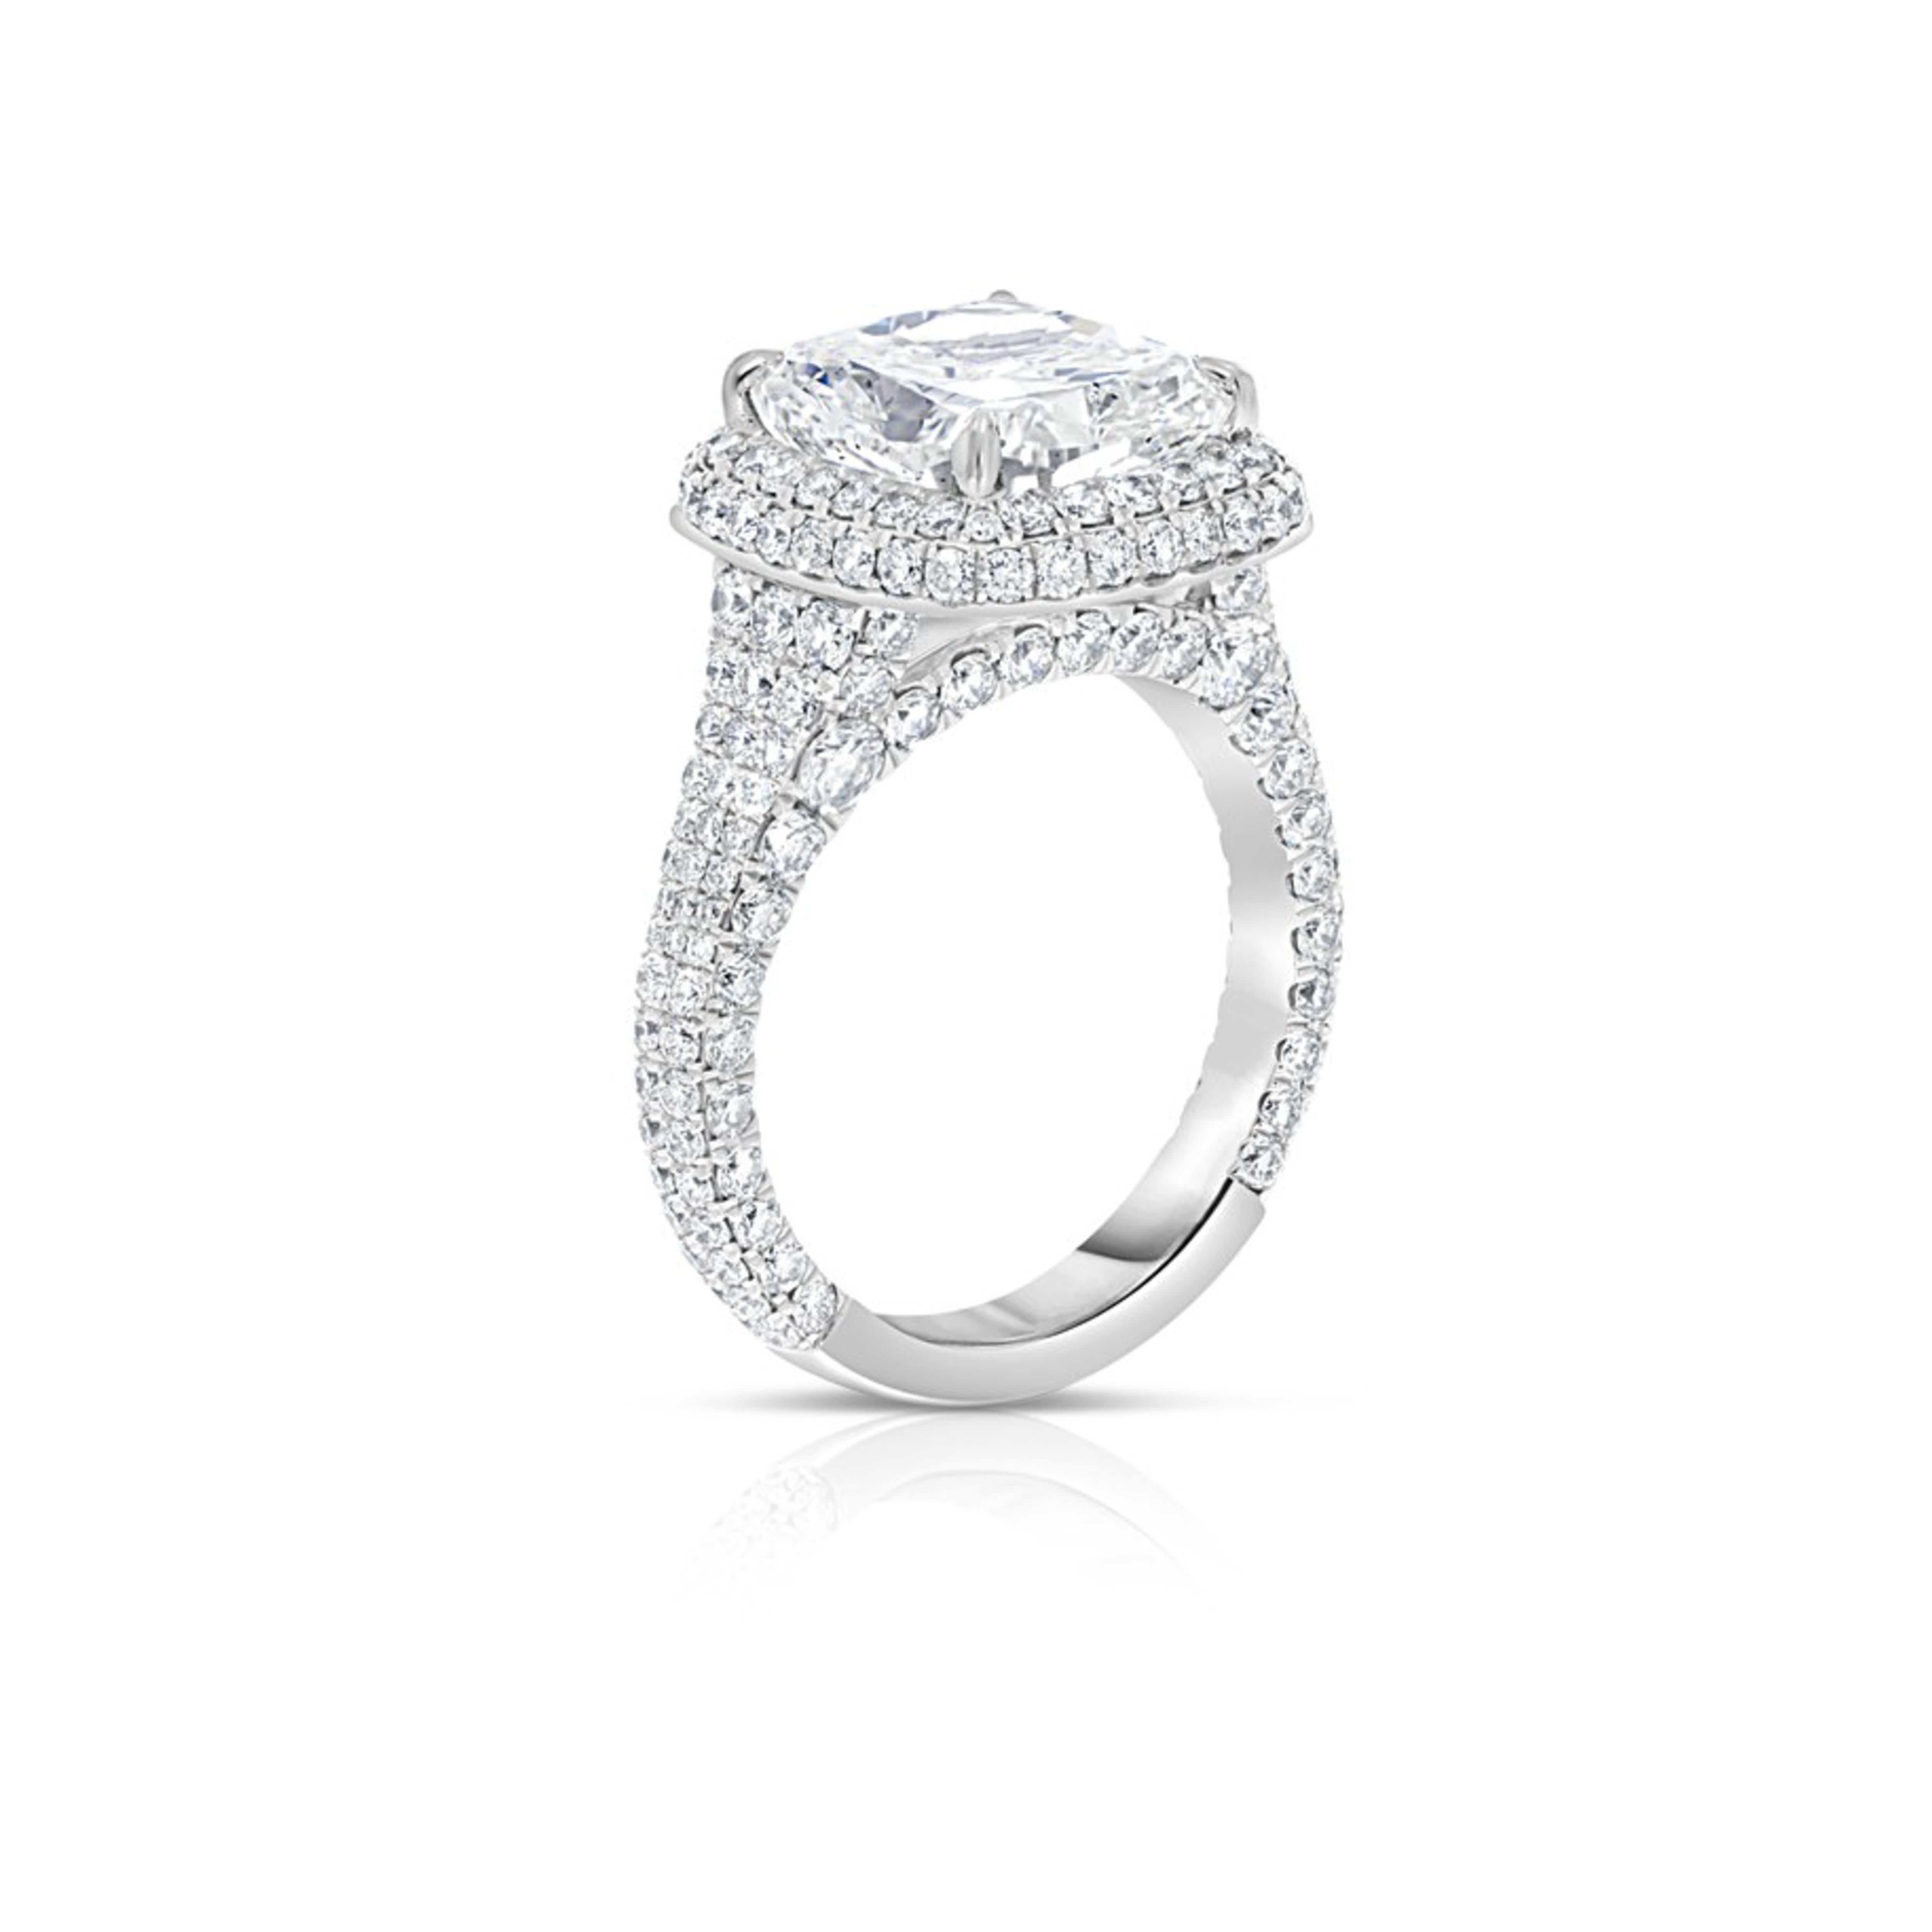 This Cushion shaped Diamond Engagement Ring displays a striking 4.64 carats cushion shaped center stone and a scintillating halo of 208 round brilliant diamonds pave-set in Platinum throughout the design, resulting in an unrivaled display of